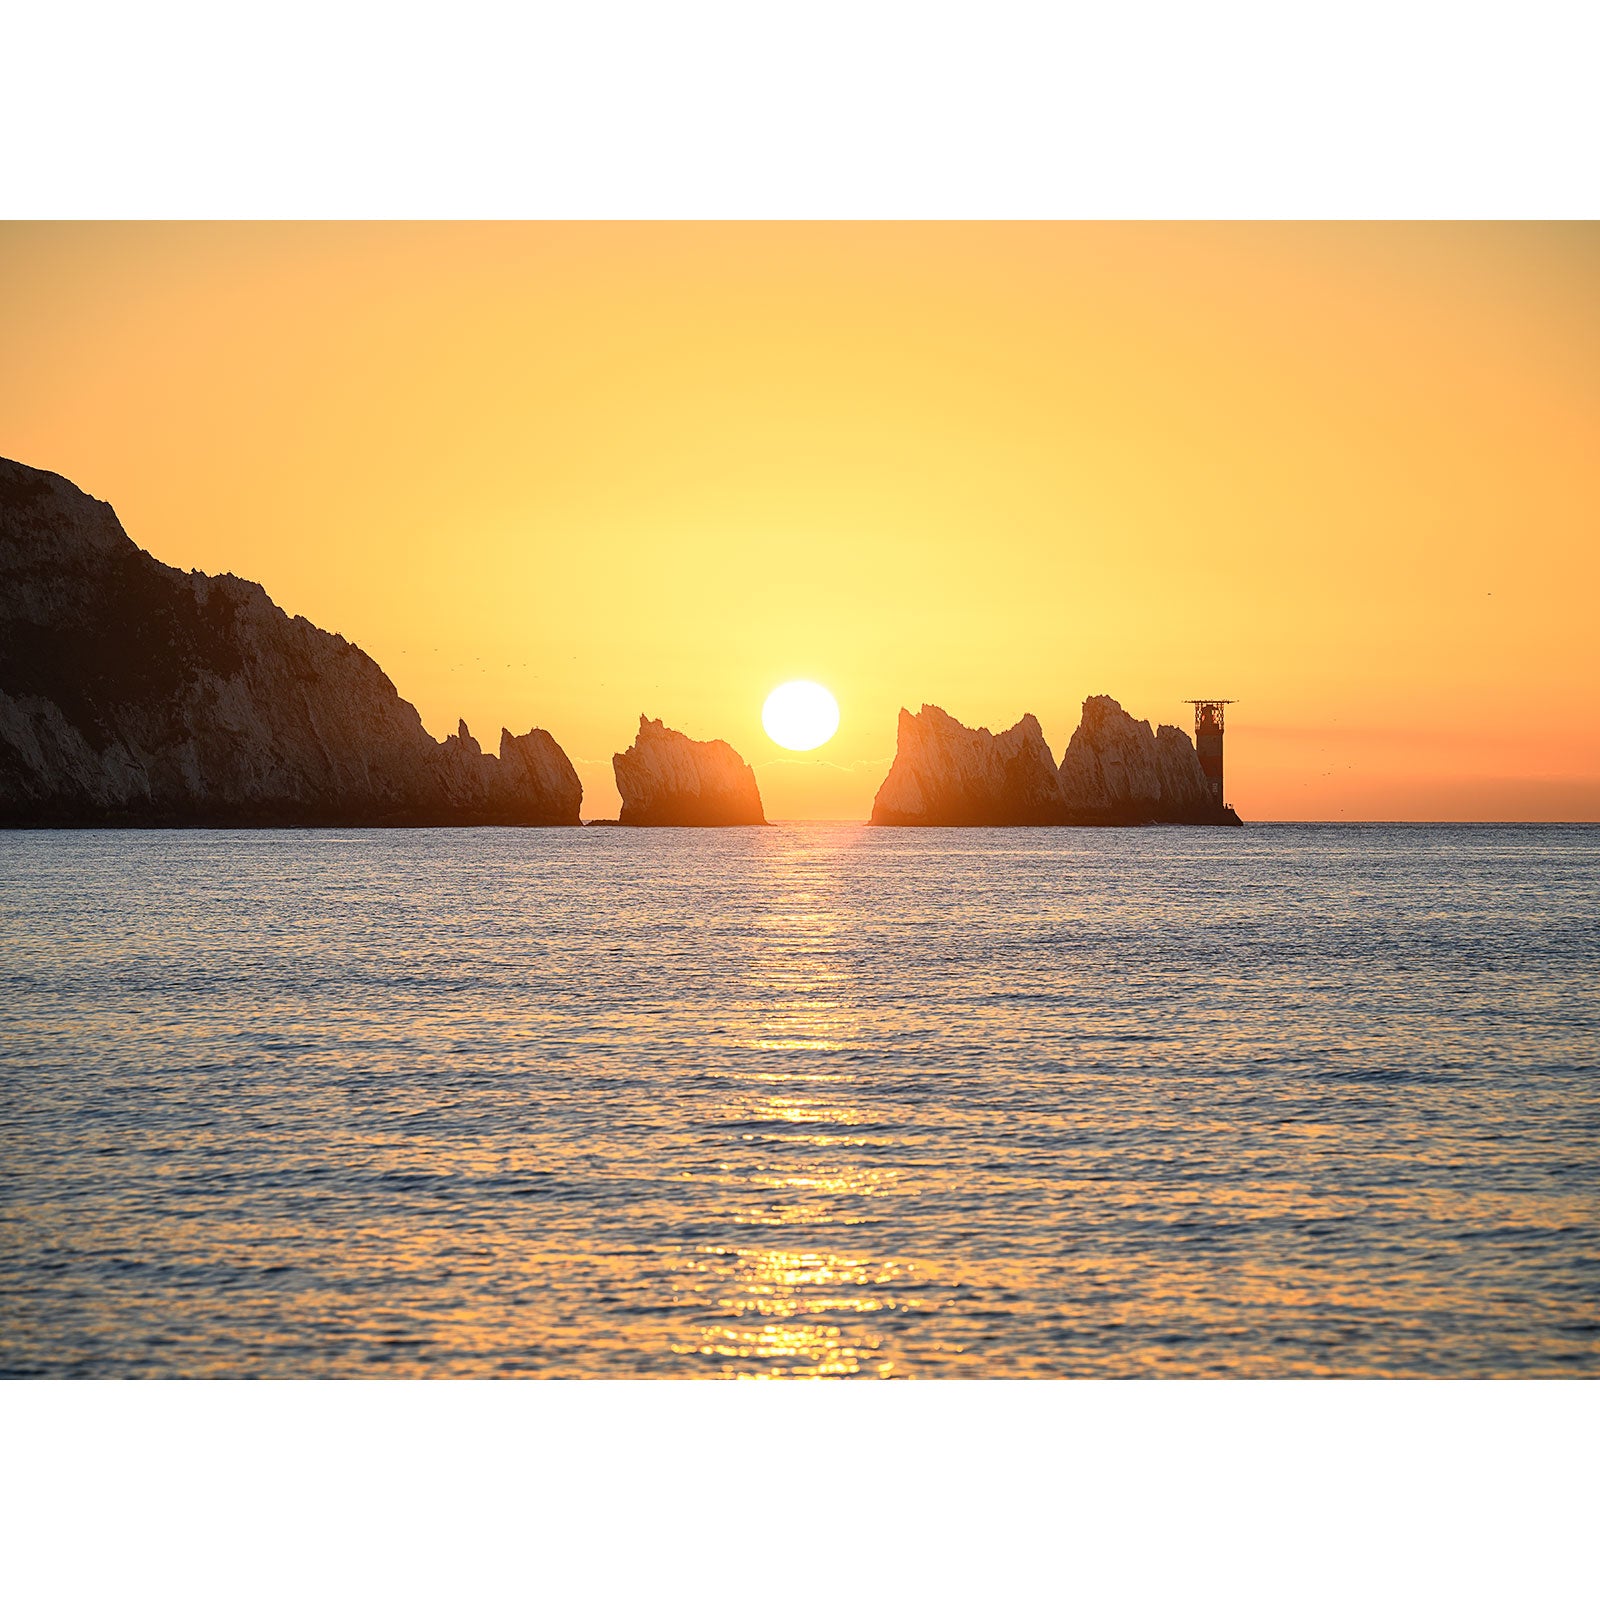 Sunset over the ocean with the sun positioned between rock formations and a silhouette of a lookout tower on the right, near The Needles by Available Light Photography.